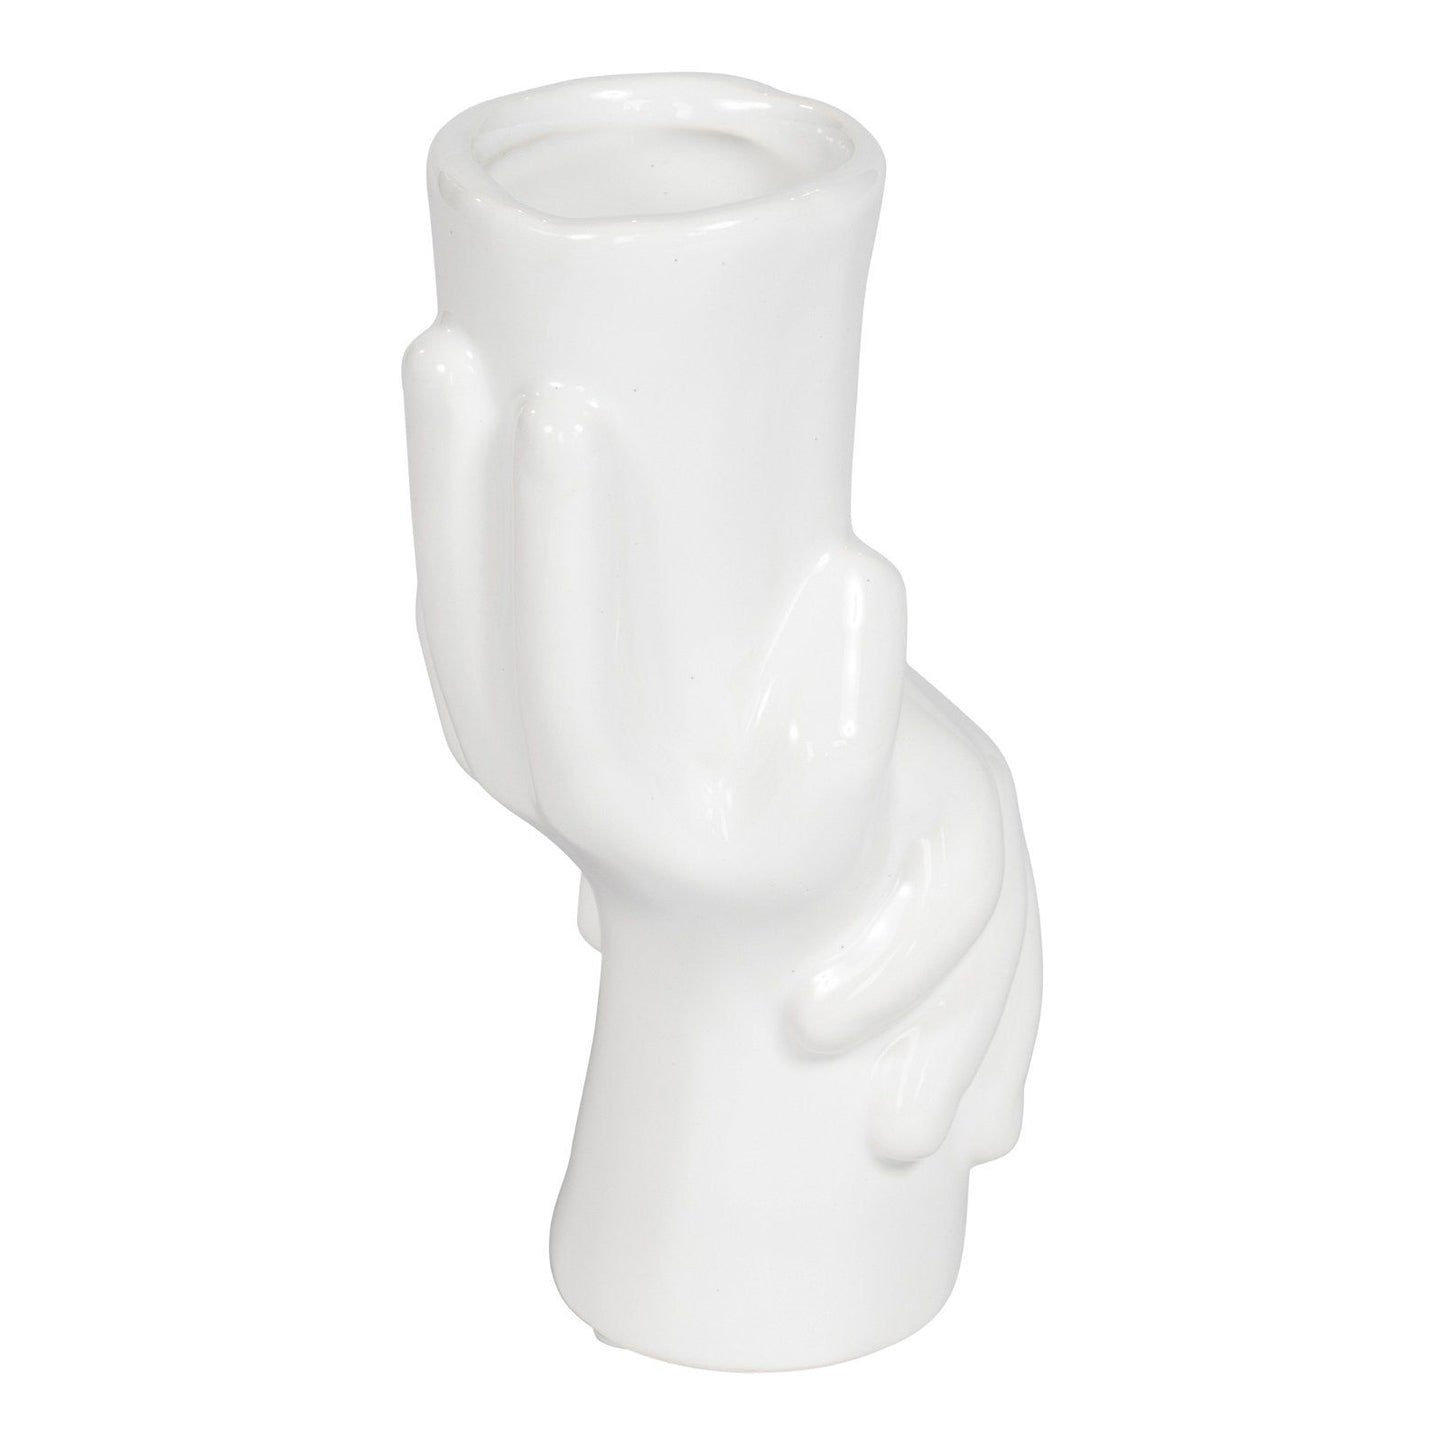 Holding Hands Ceramic Vase Small - Ashton and Finch